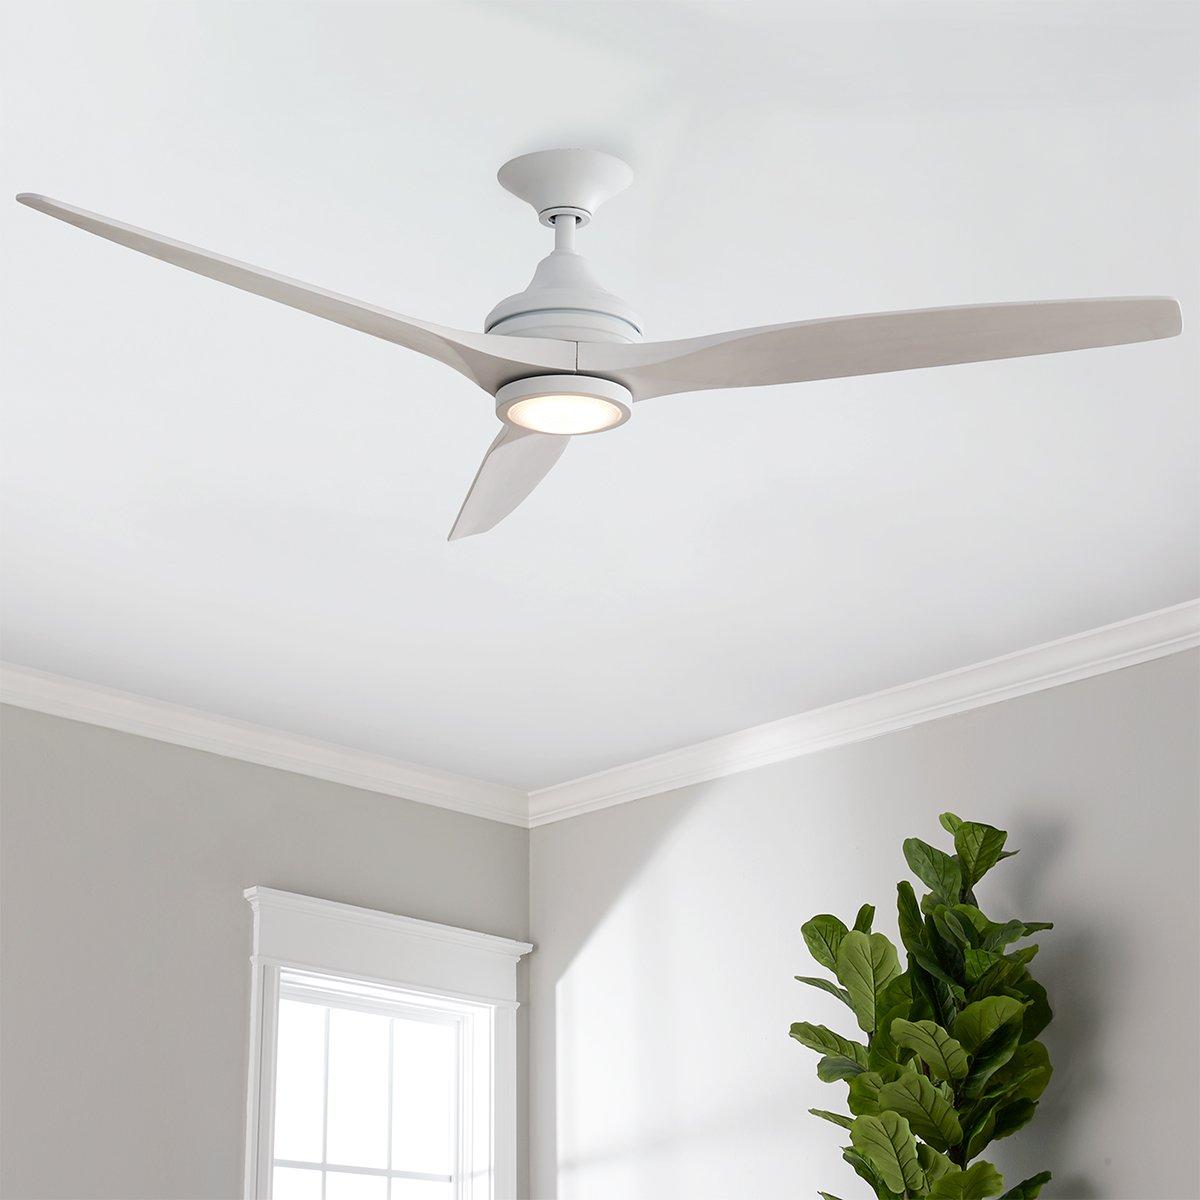 Installing a Ceiling Fan with a Separate Light Switch插图4